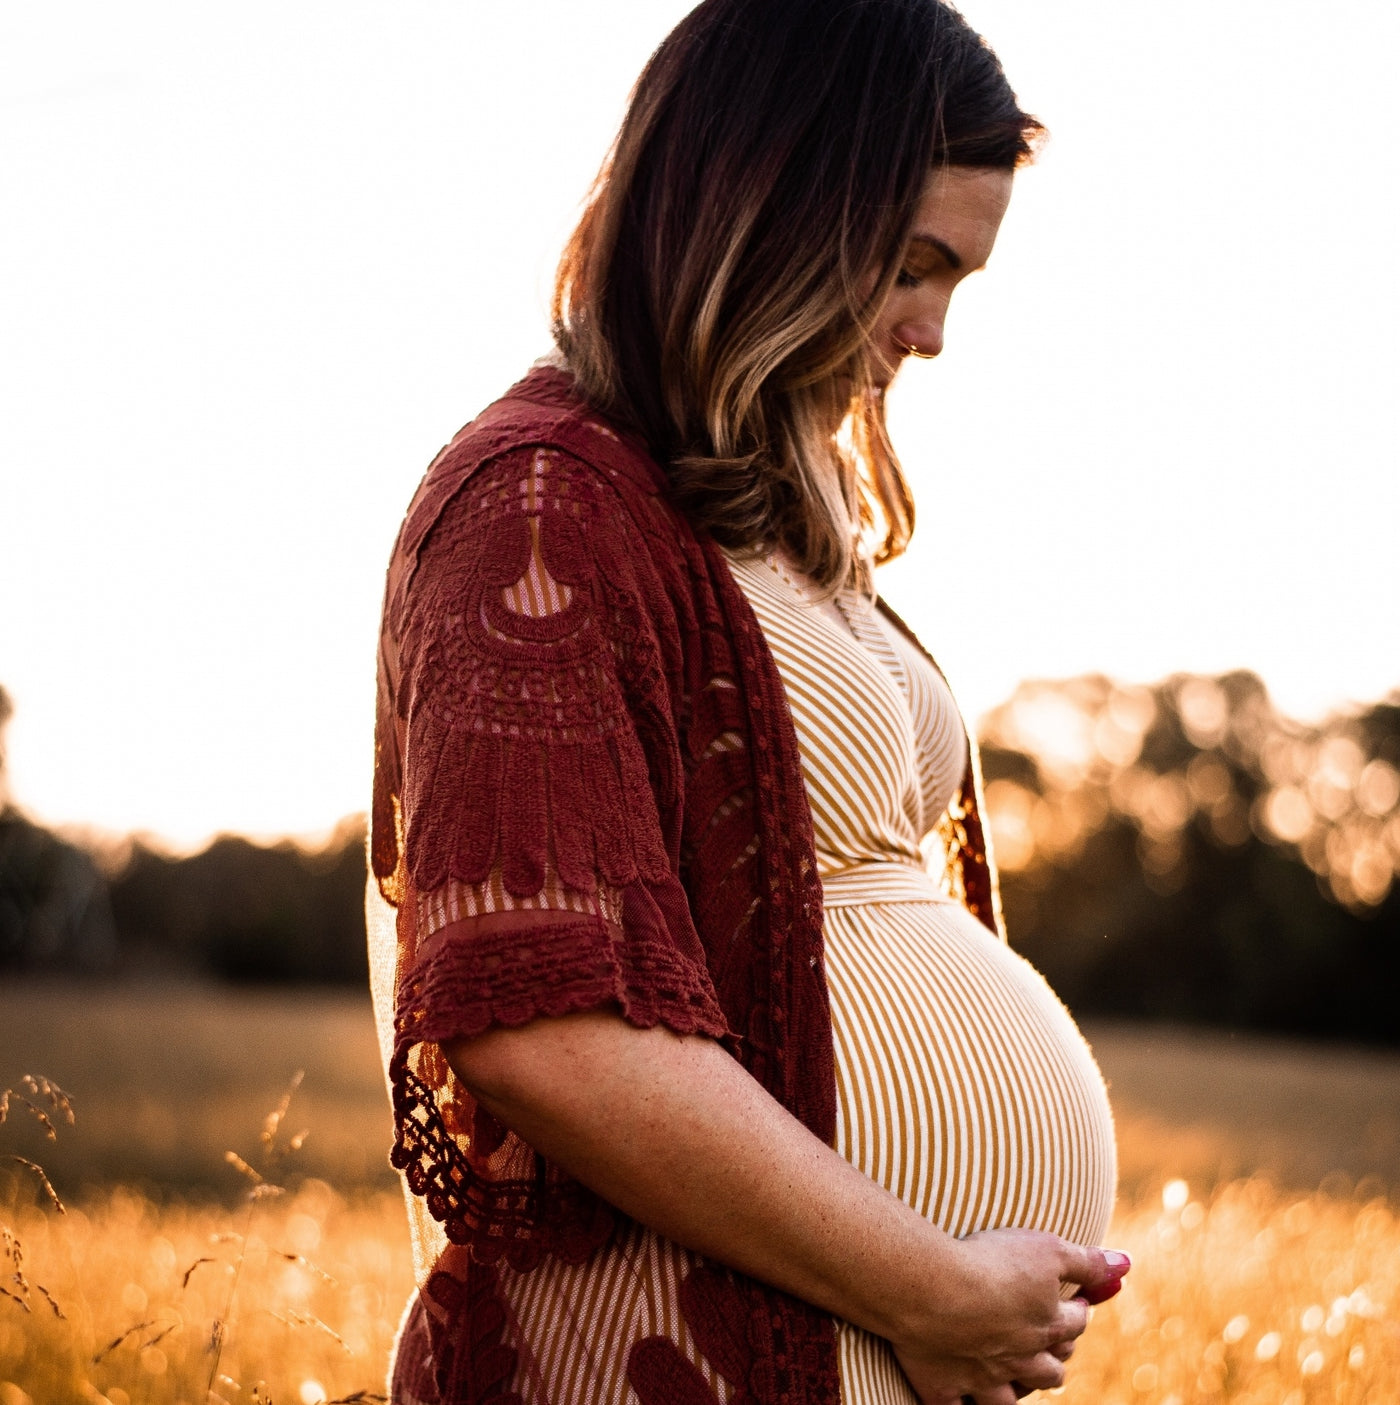 Pregnant: feeling love for your baby